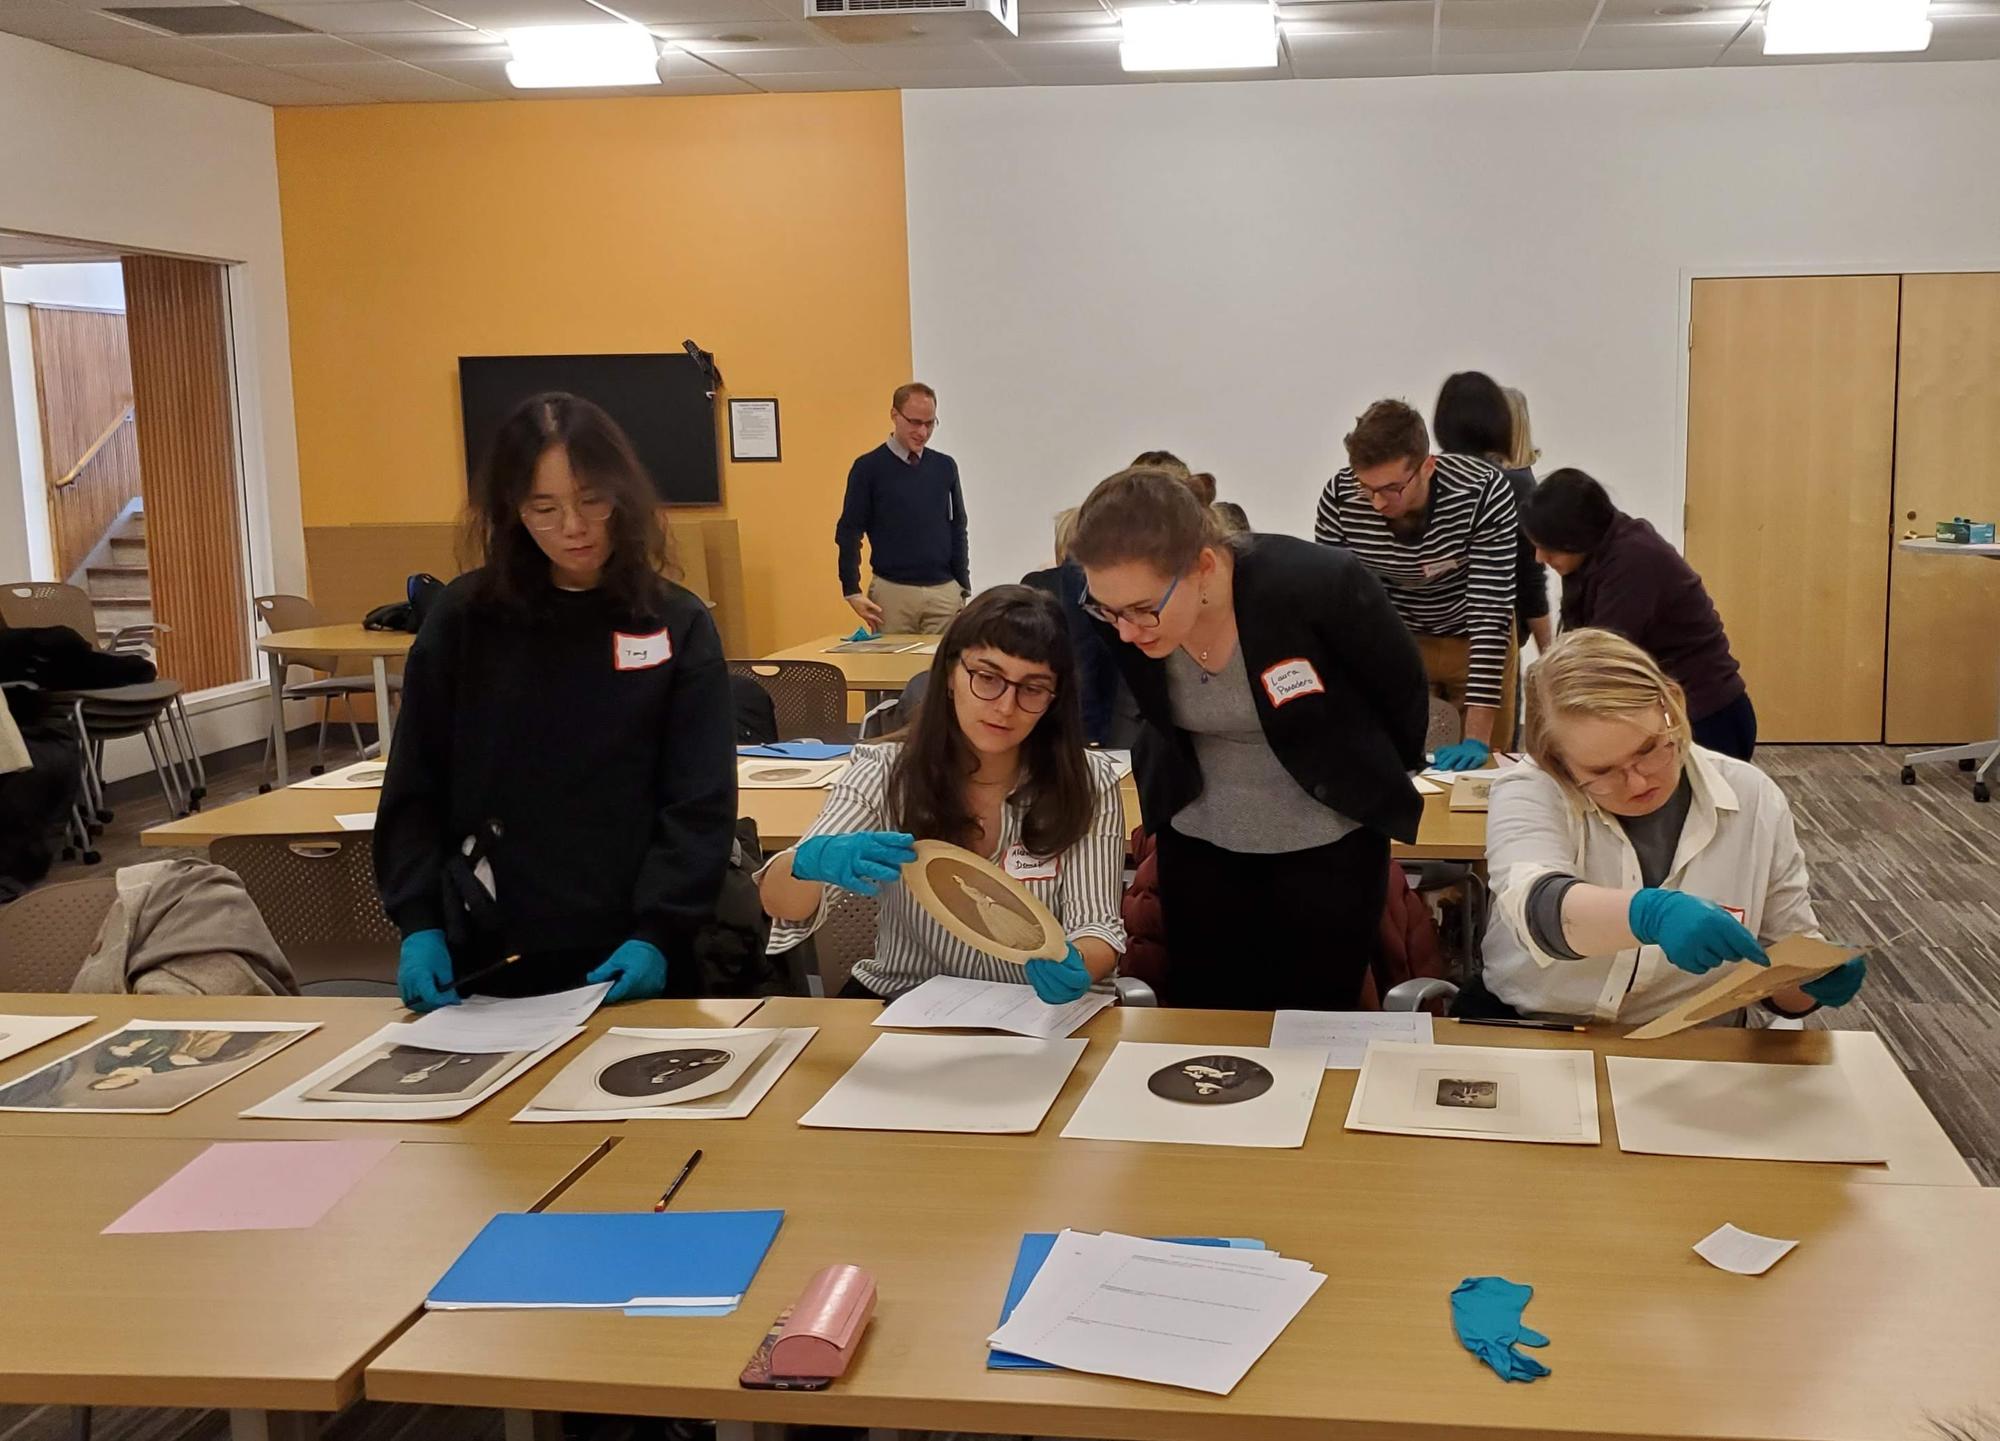 Students gathered around a table looking at salted paper prints.